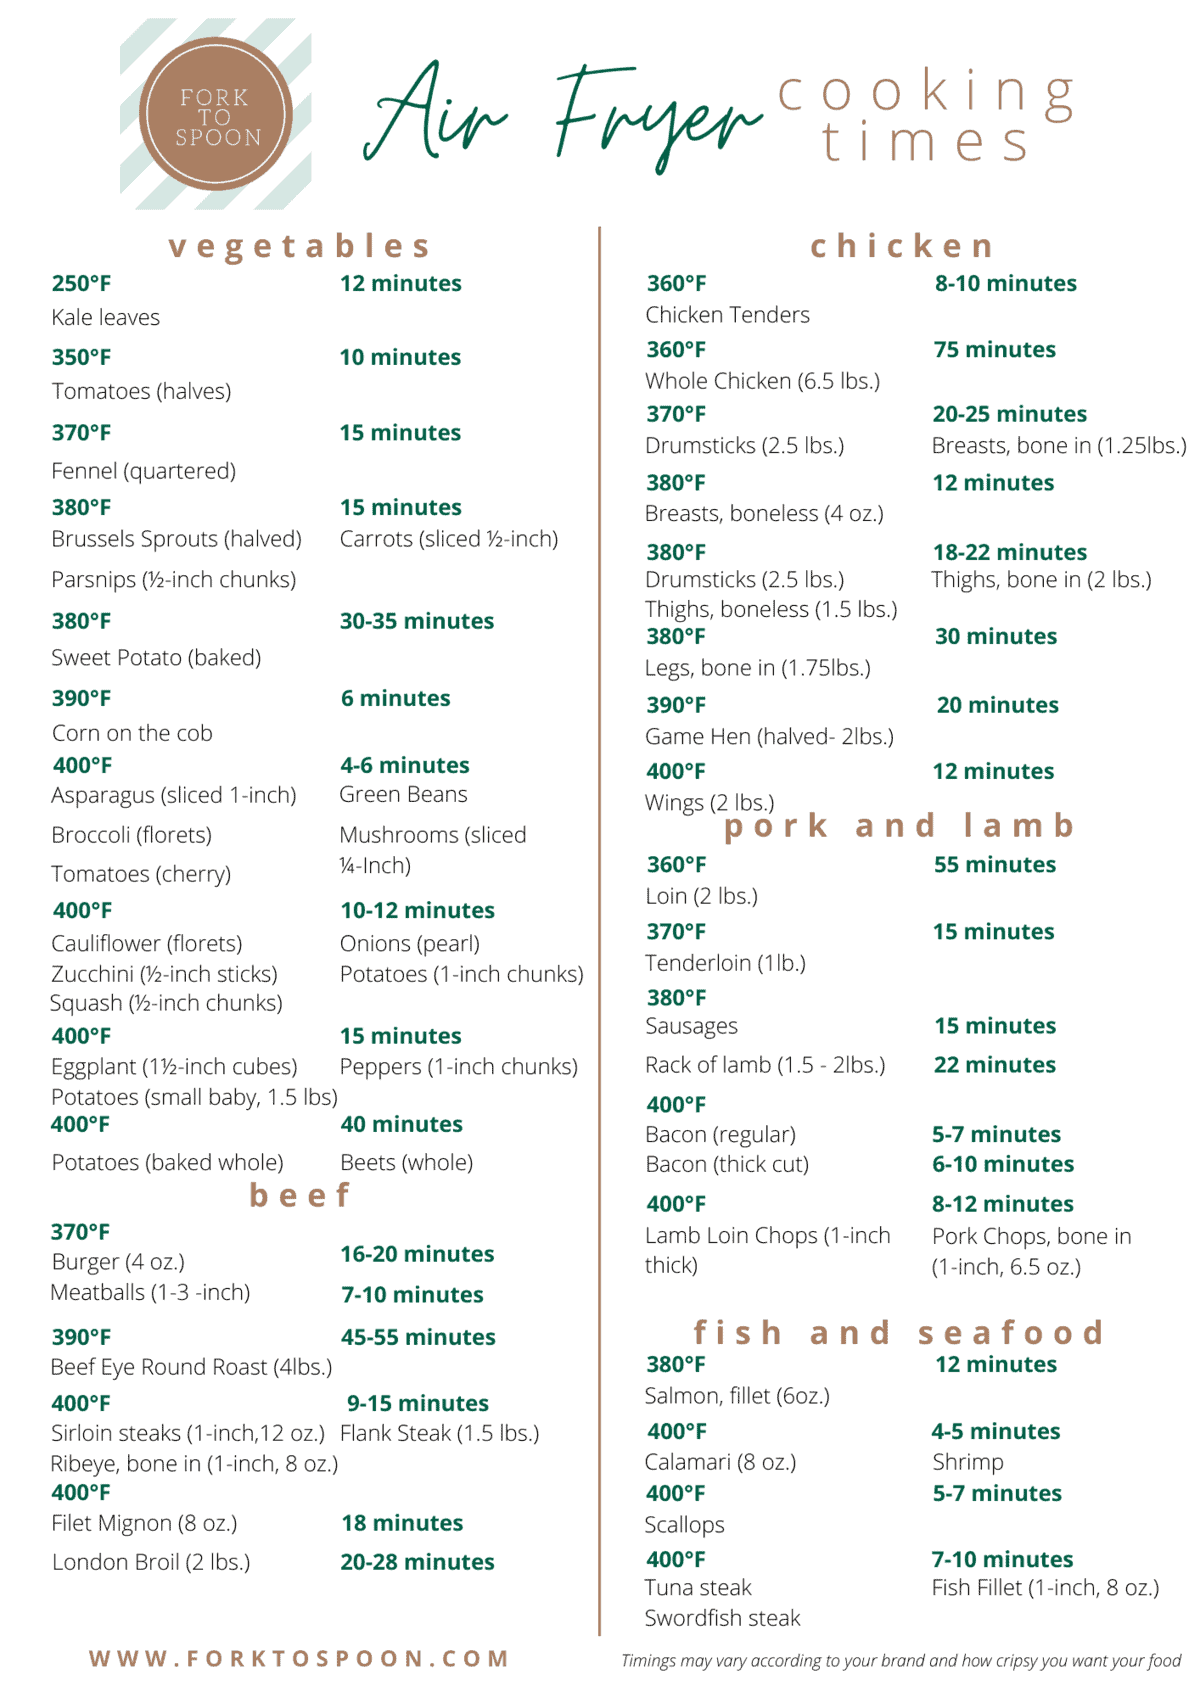 Air Fryer Cooking Times-Printable Cheat Sheet in Celsius - Fork To Spoon